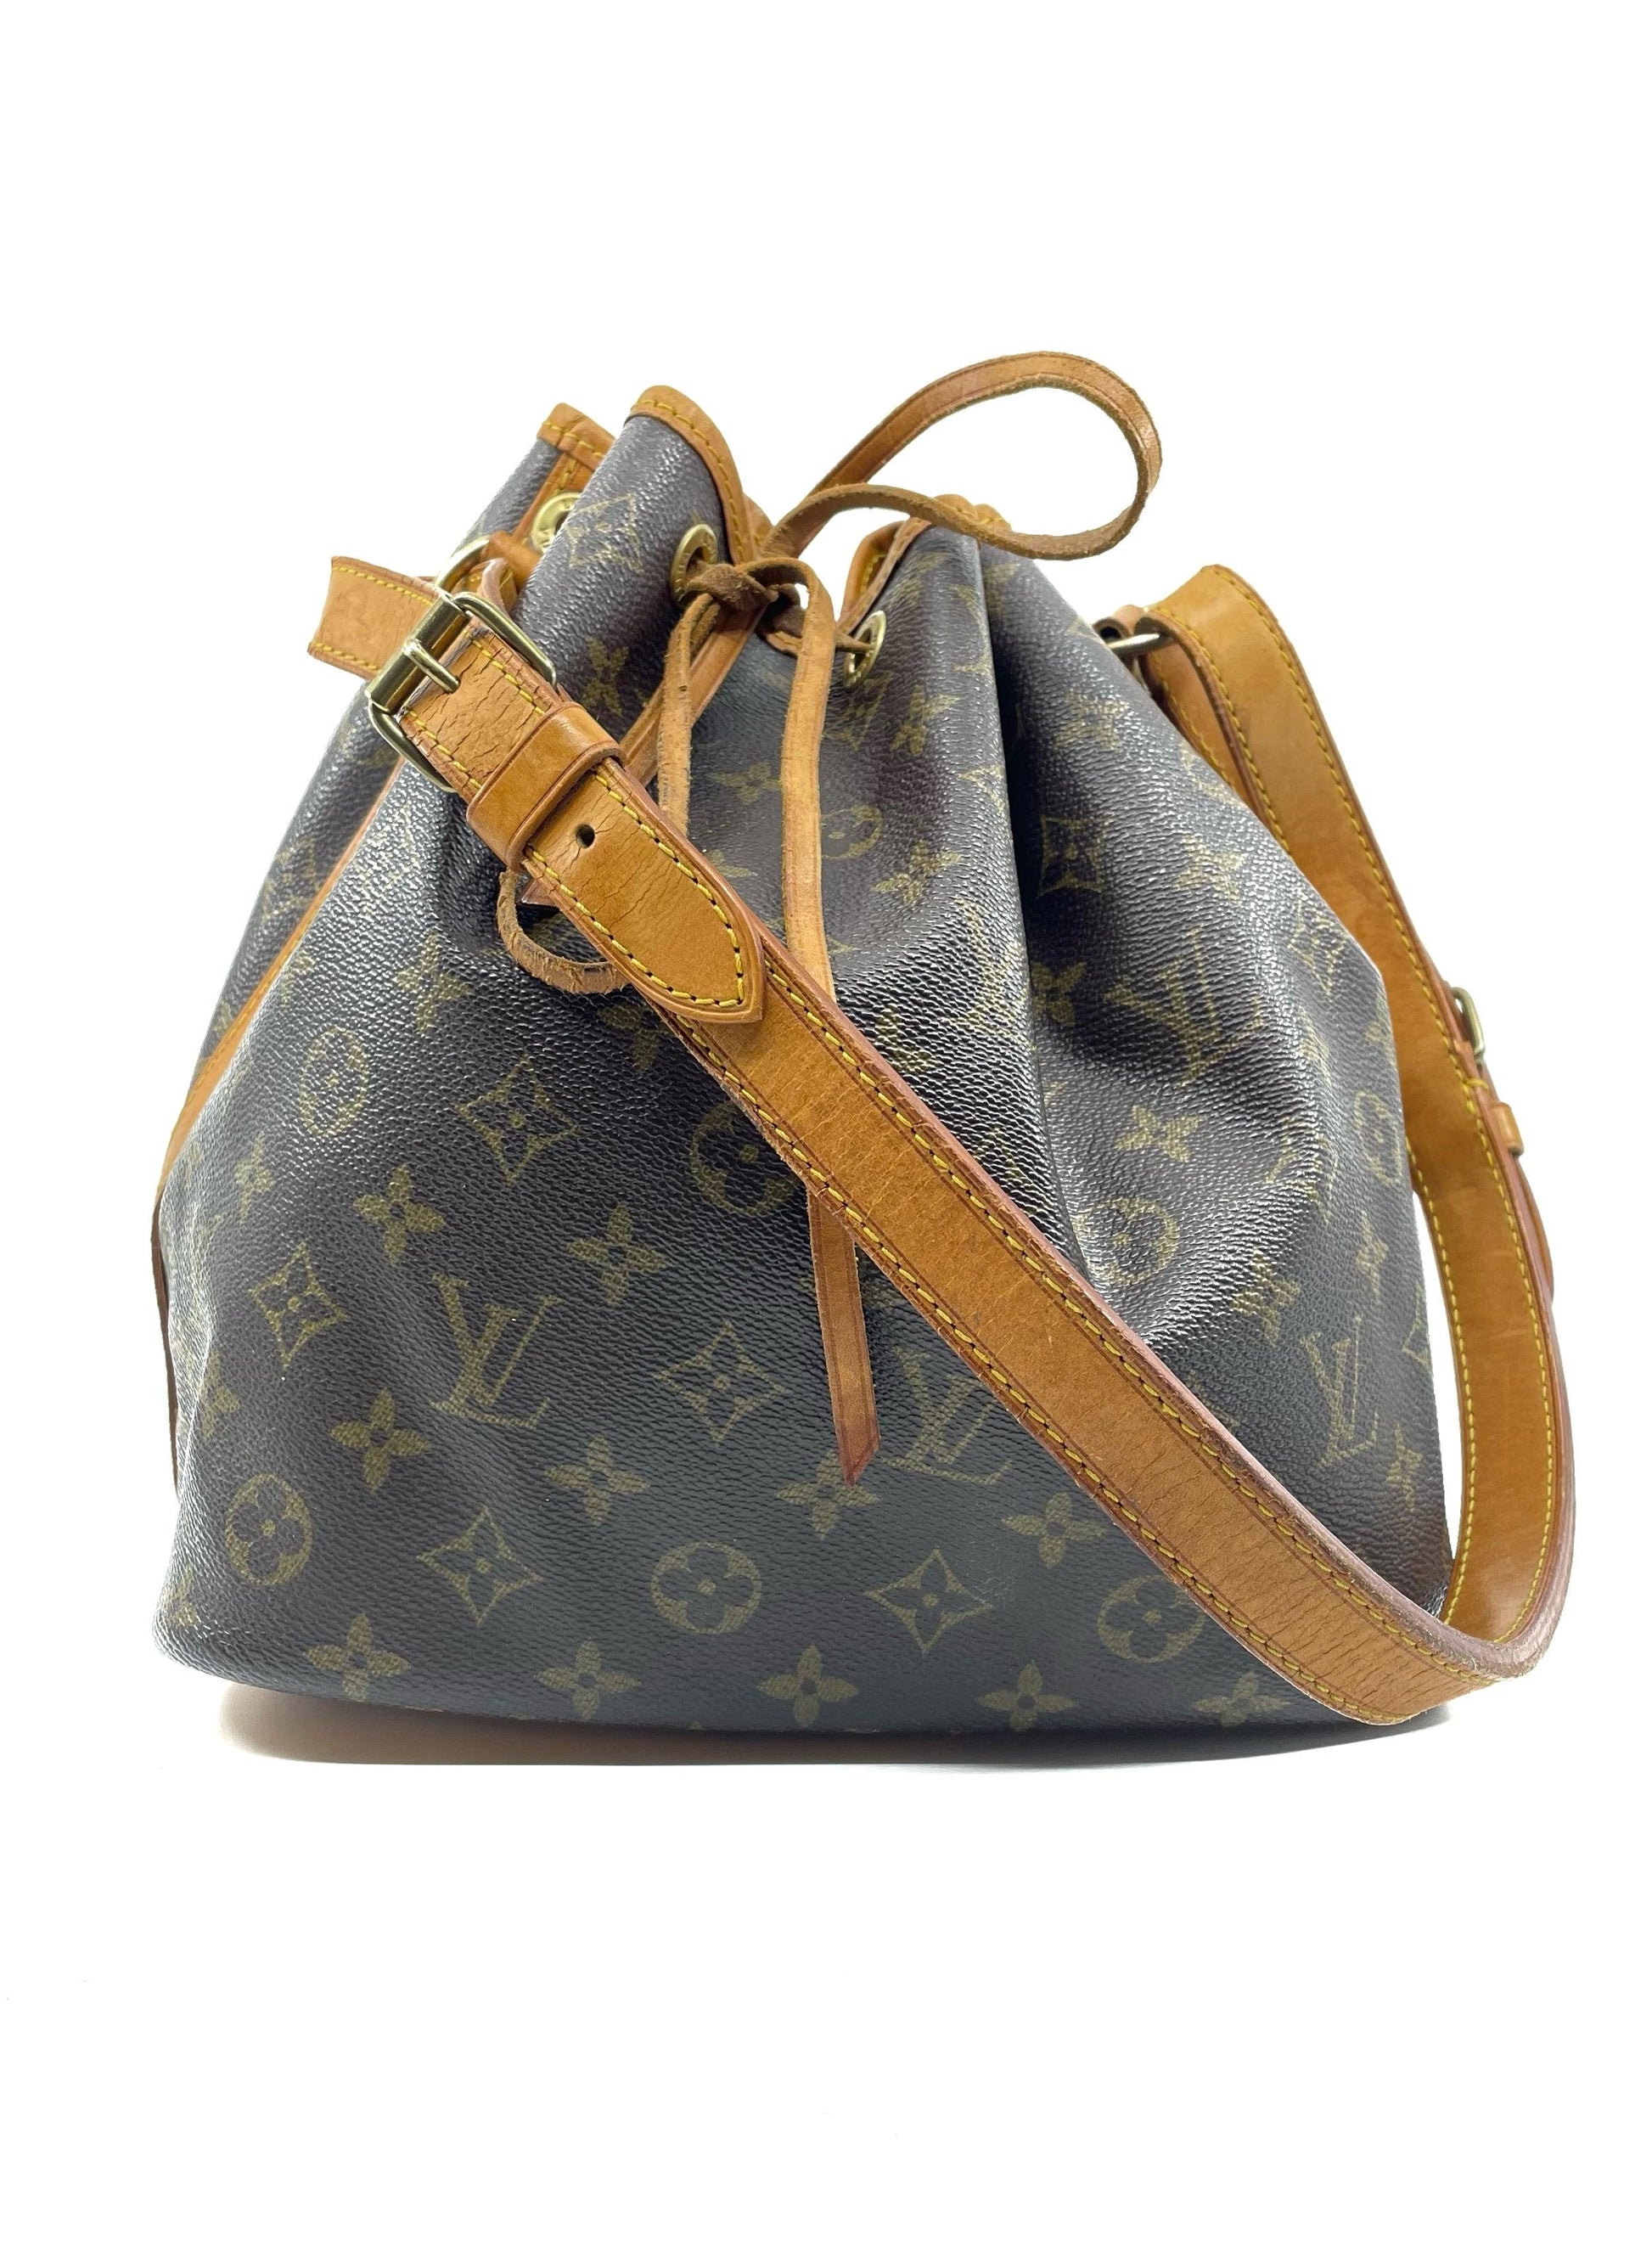 Louis Vuitton Vachetta Leather Petit Bucket Bag with Pouch at